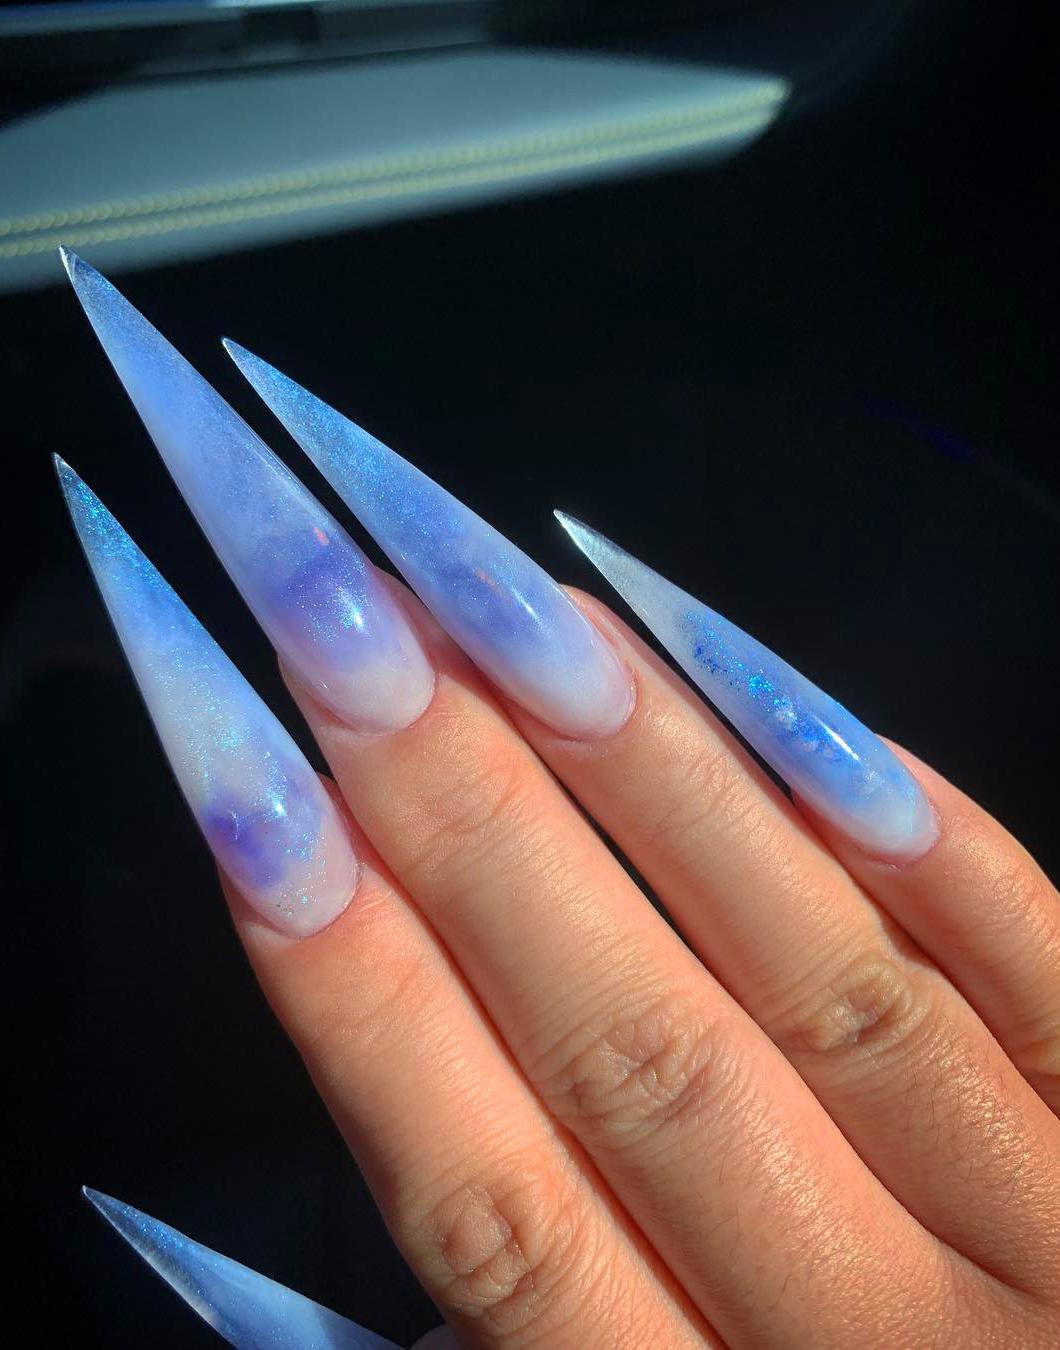 10+ Acrylic Nails To Inspire Yourself